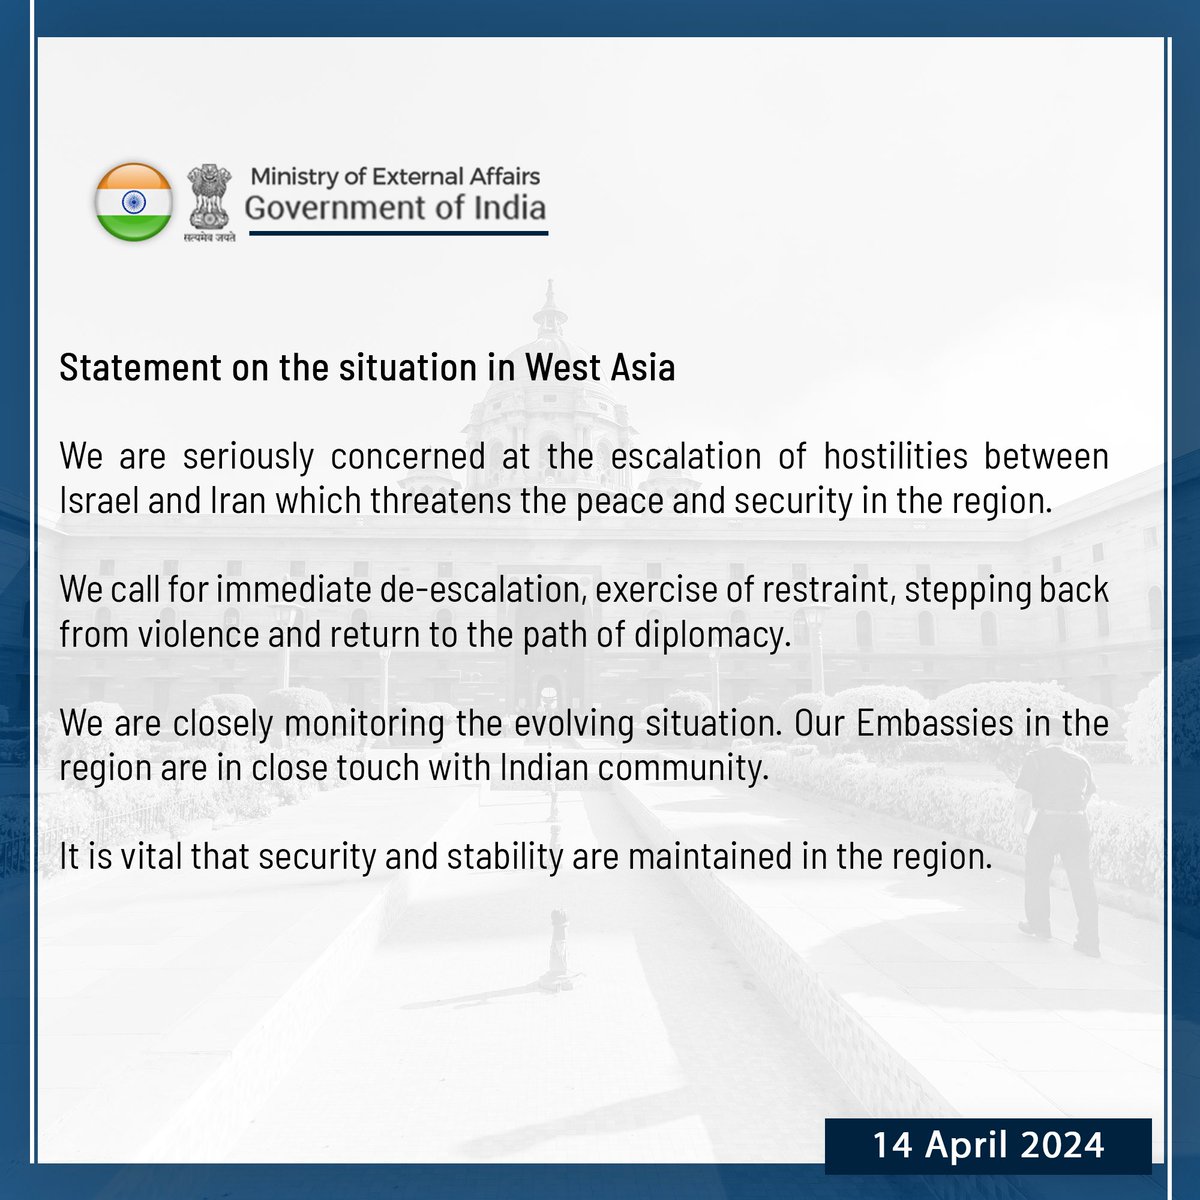 #EAM issues a statement on the situation in #WestAsia.